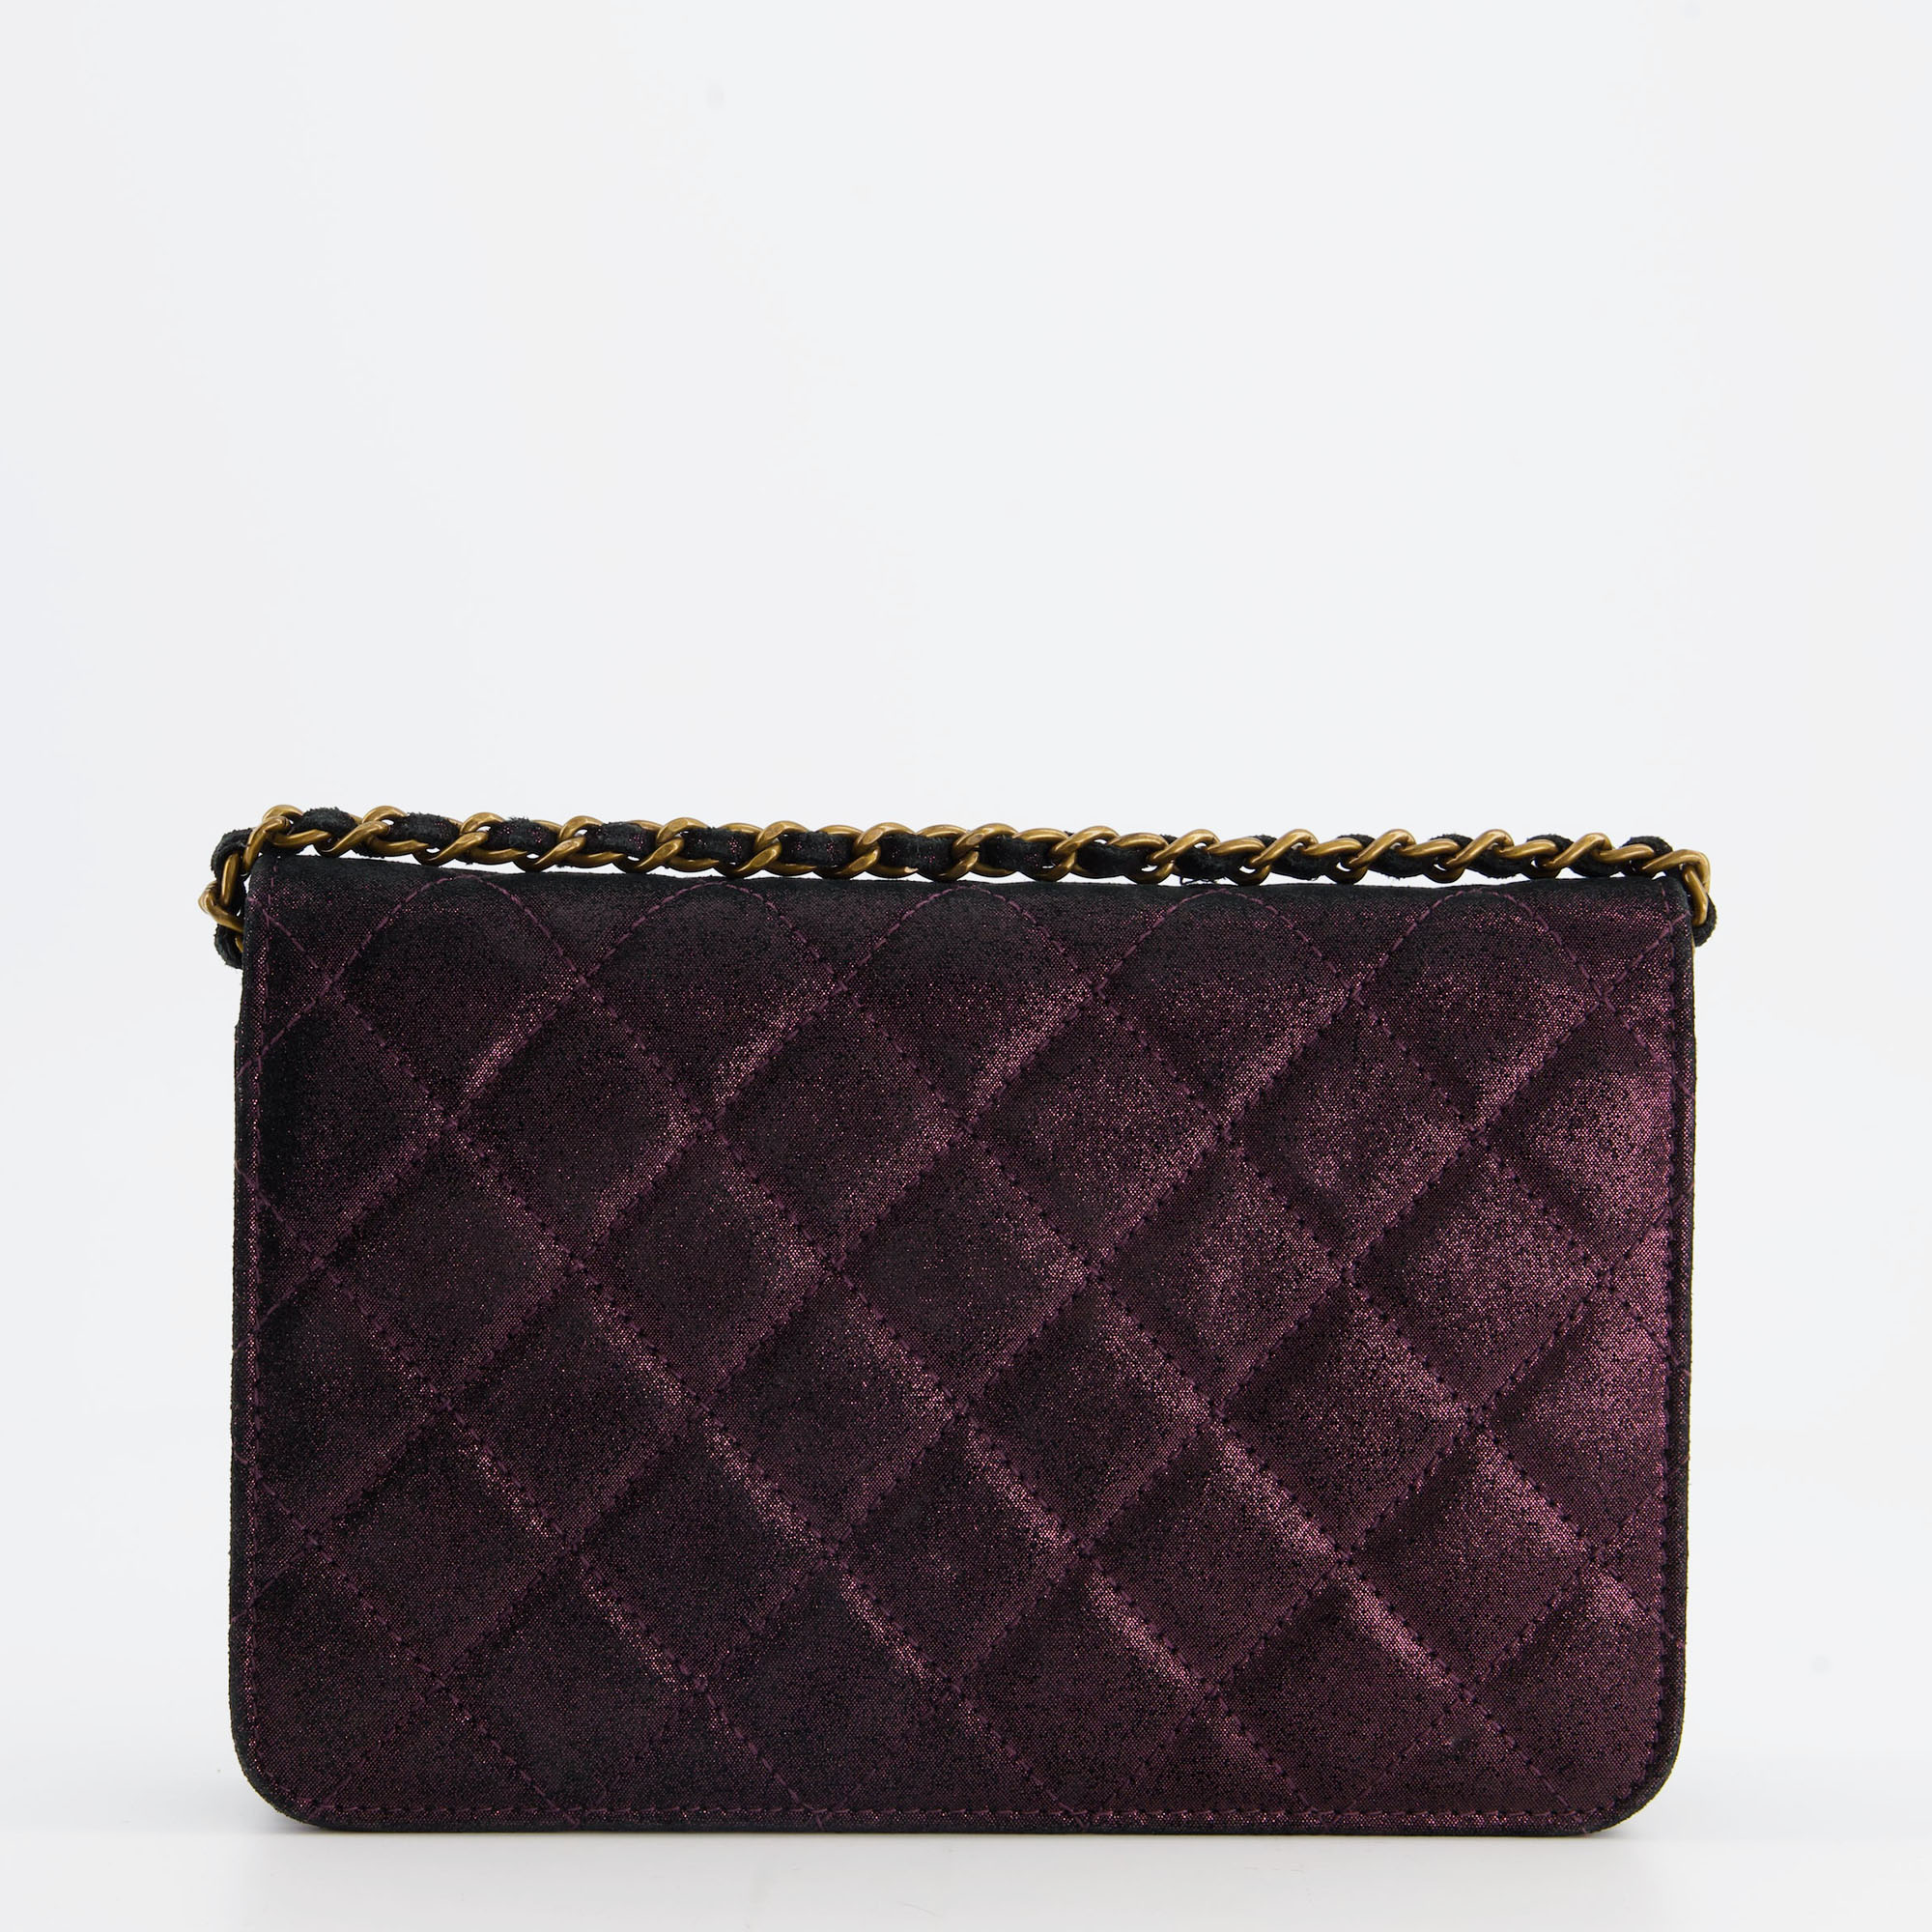 Chanel Metallic Purple Wallet On Chain With Antique Gold Hardware